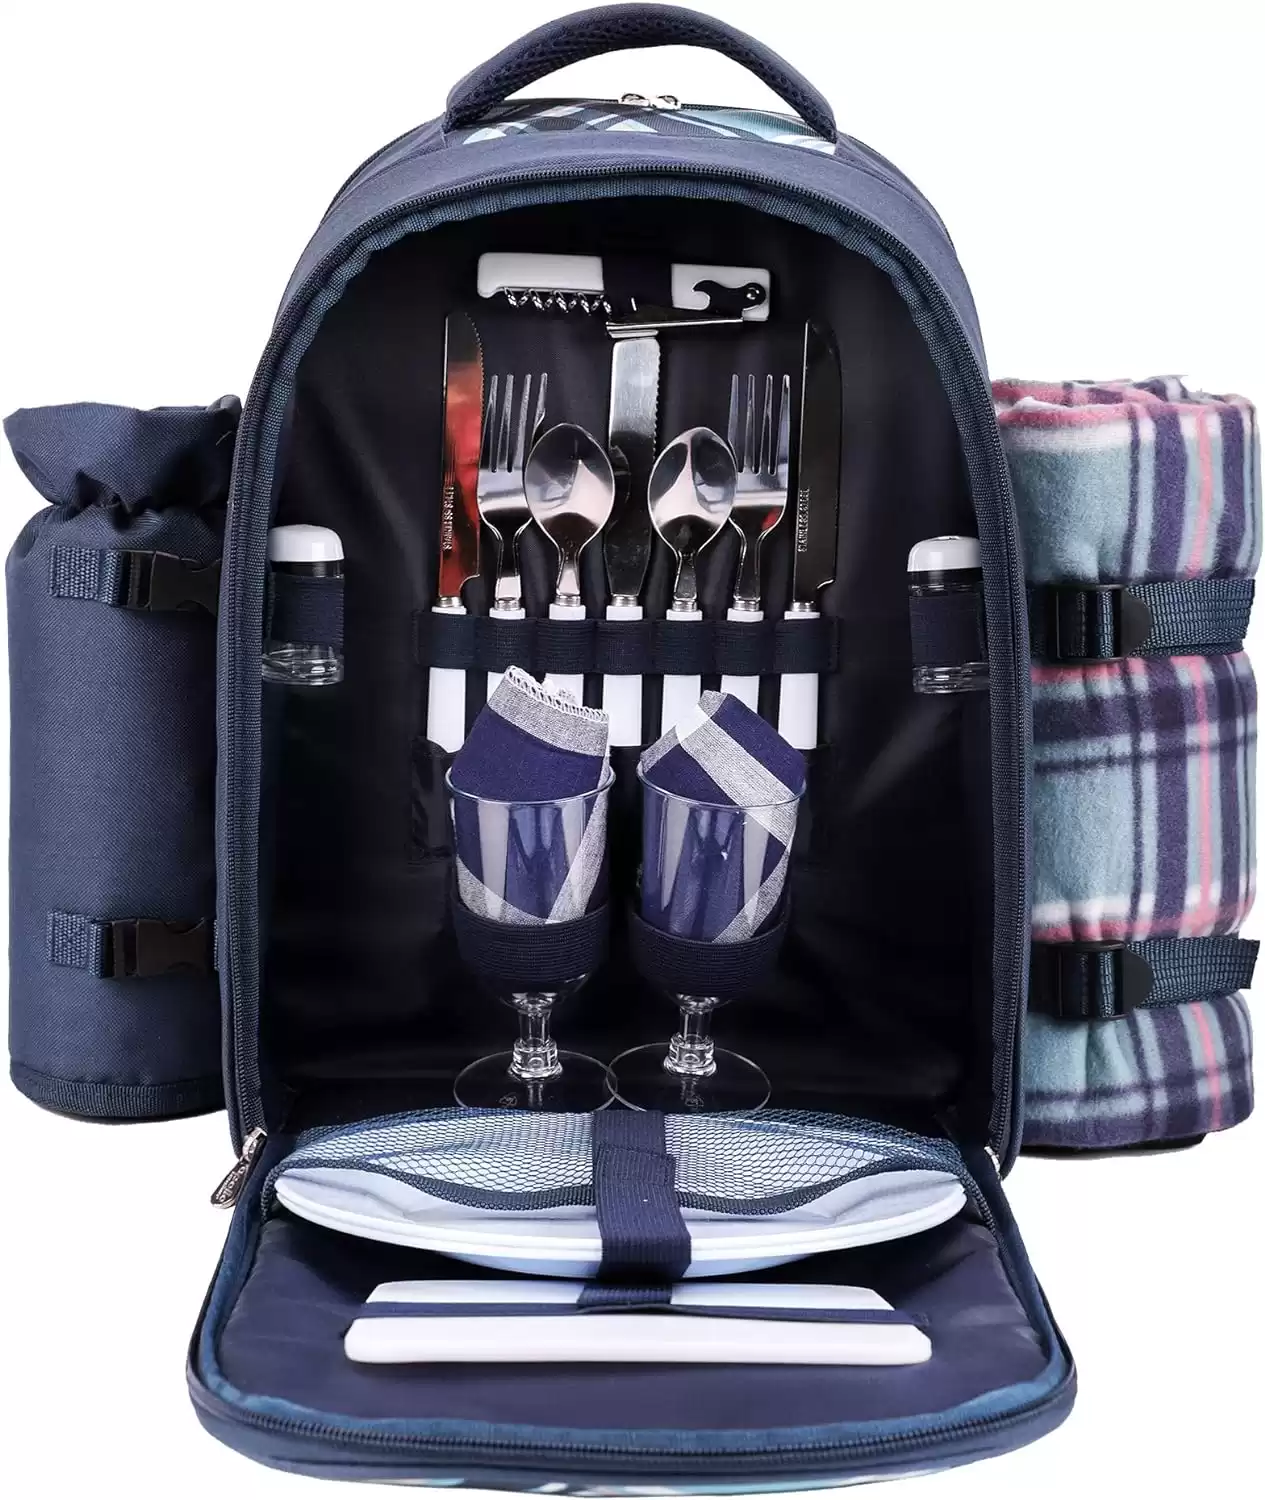 Apollo Walker Picnic Backpack w/Cooler Compartment, Detachable Wine Holder, Fleece Blanket, Plates and Cutlery